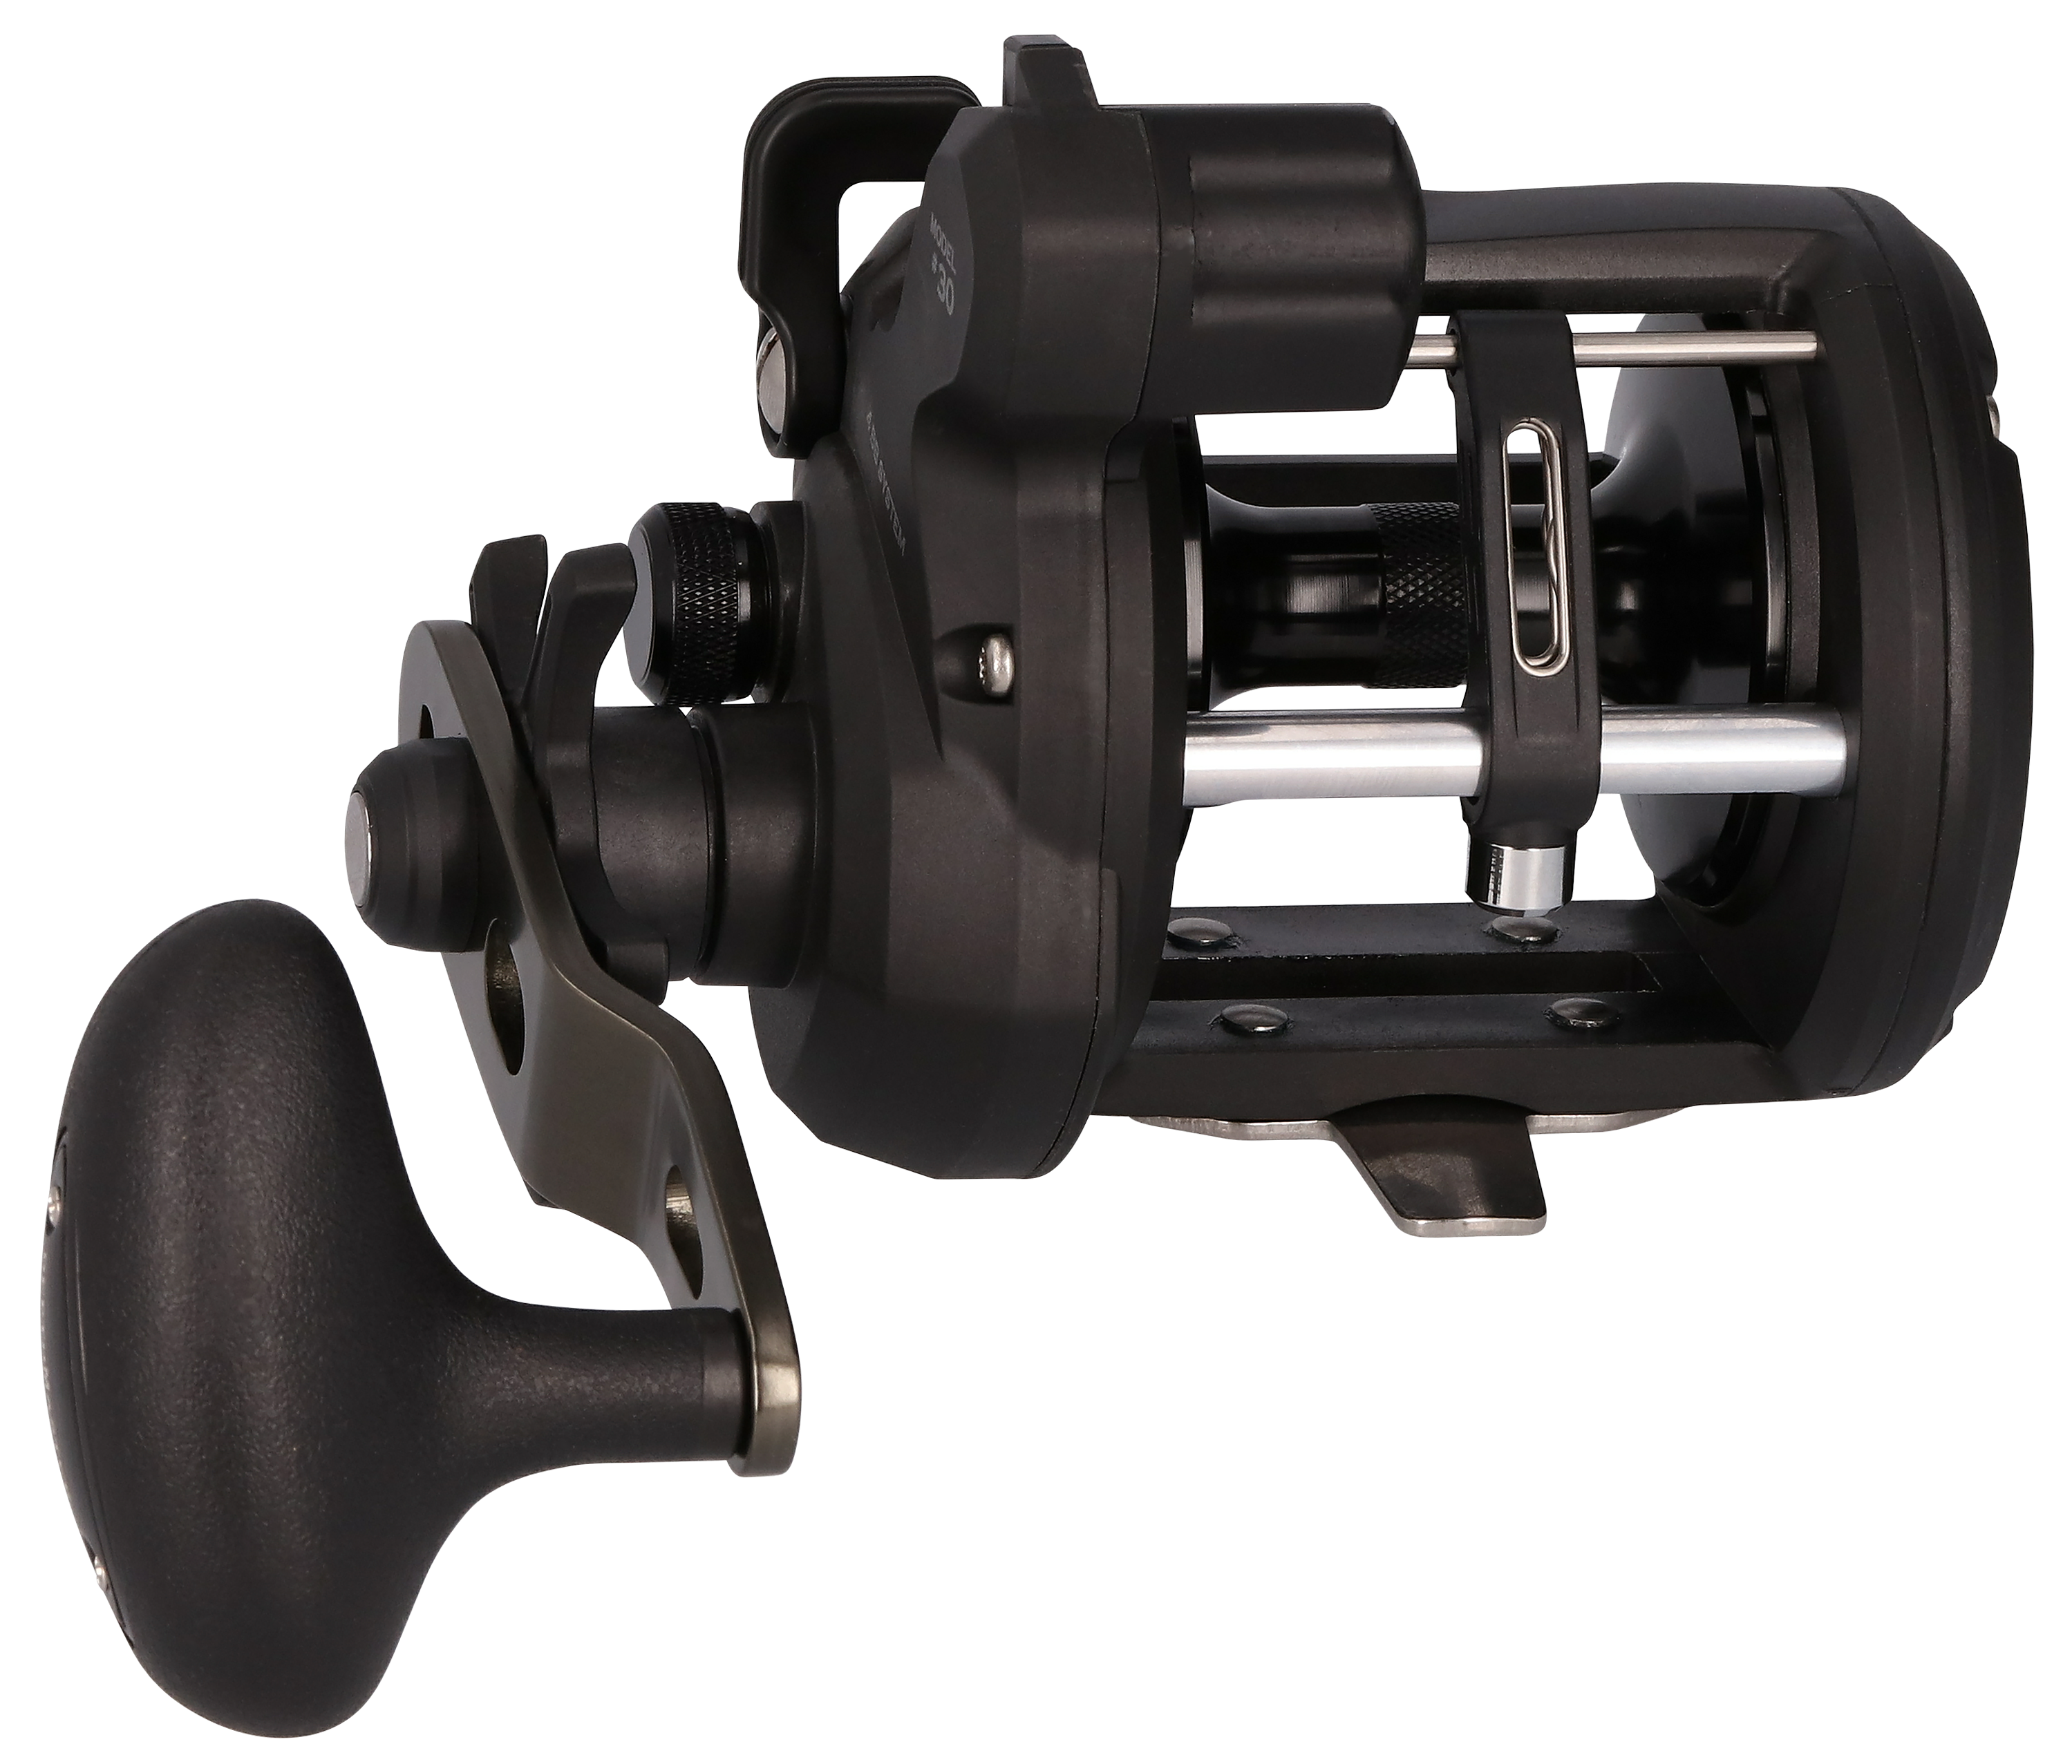 Line Counter - Reels - RODS & REELS - Fishing - Sporting Goods - Shop